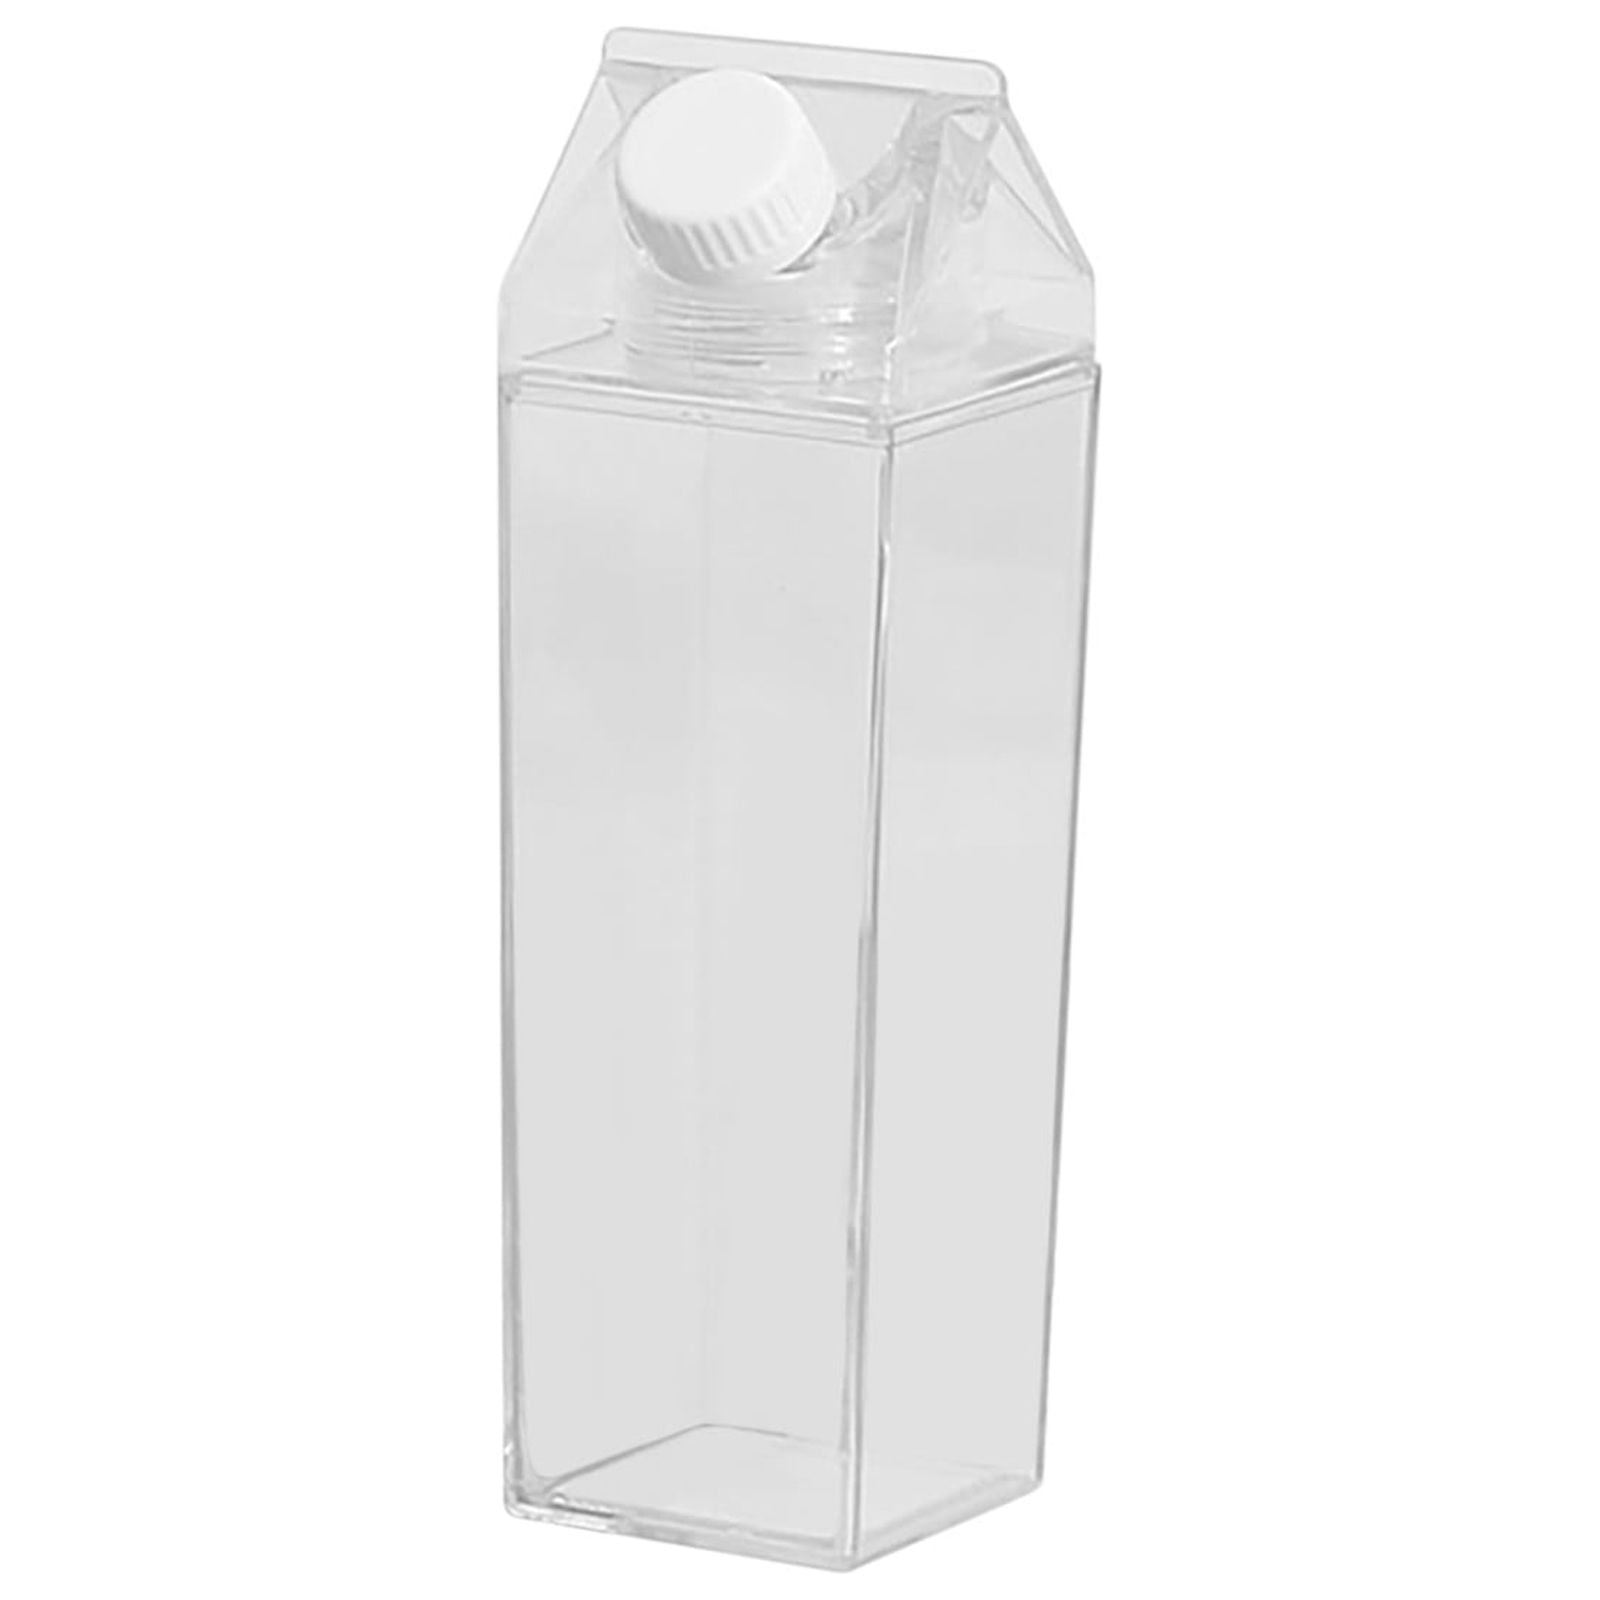 MTFun 500Ml/1000Ml Clear Milk Carton Water Bottle Leak-proof Milk Box Water  Bottle with 2 Spouts Portable Reusable Milk Bottles Water Juice Tea  Container for Travel Sports Camping Use 